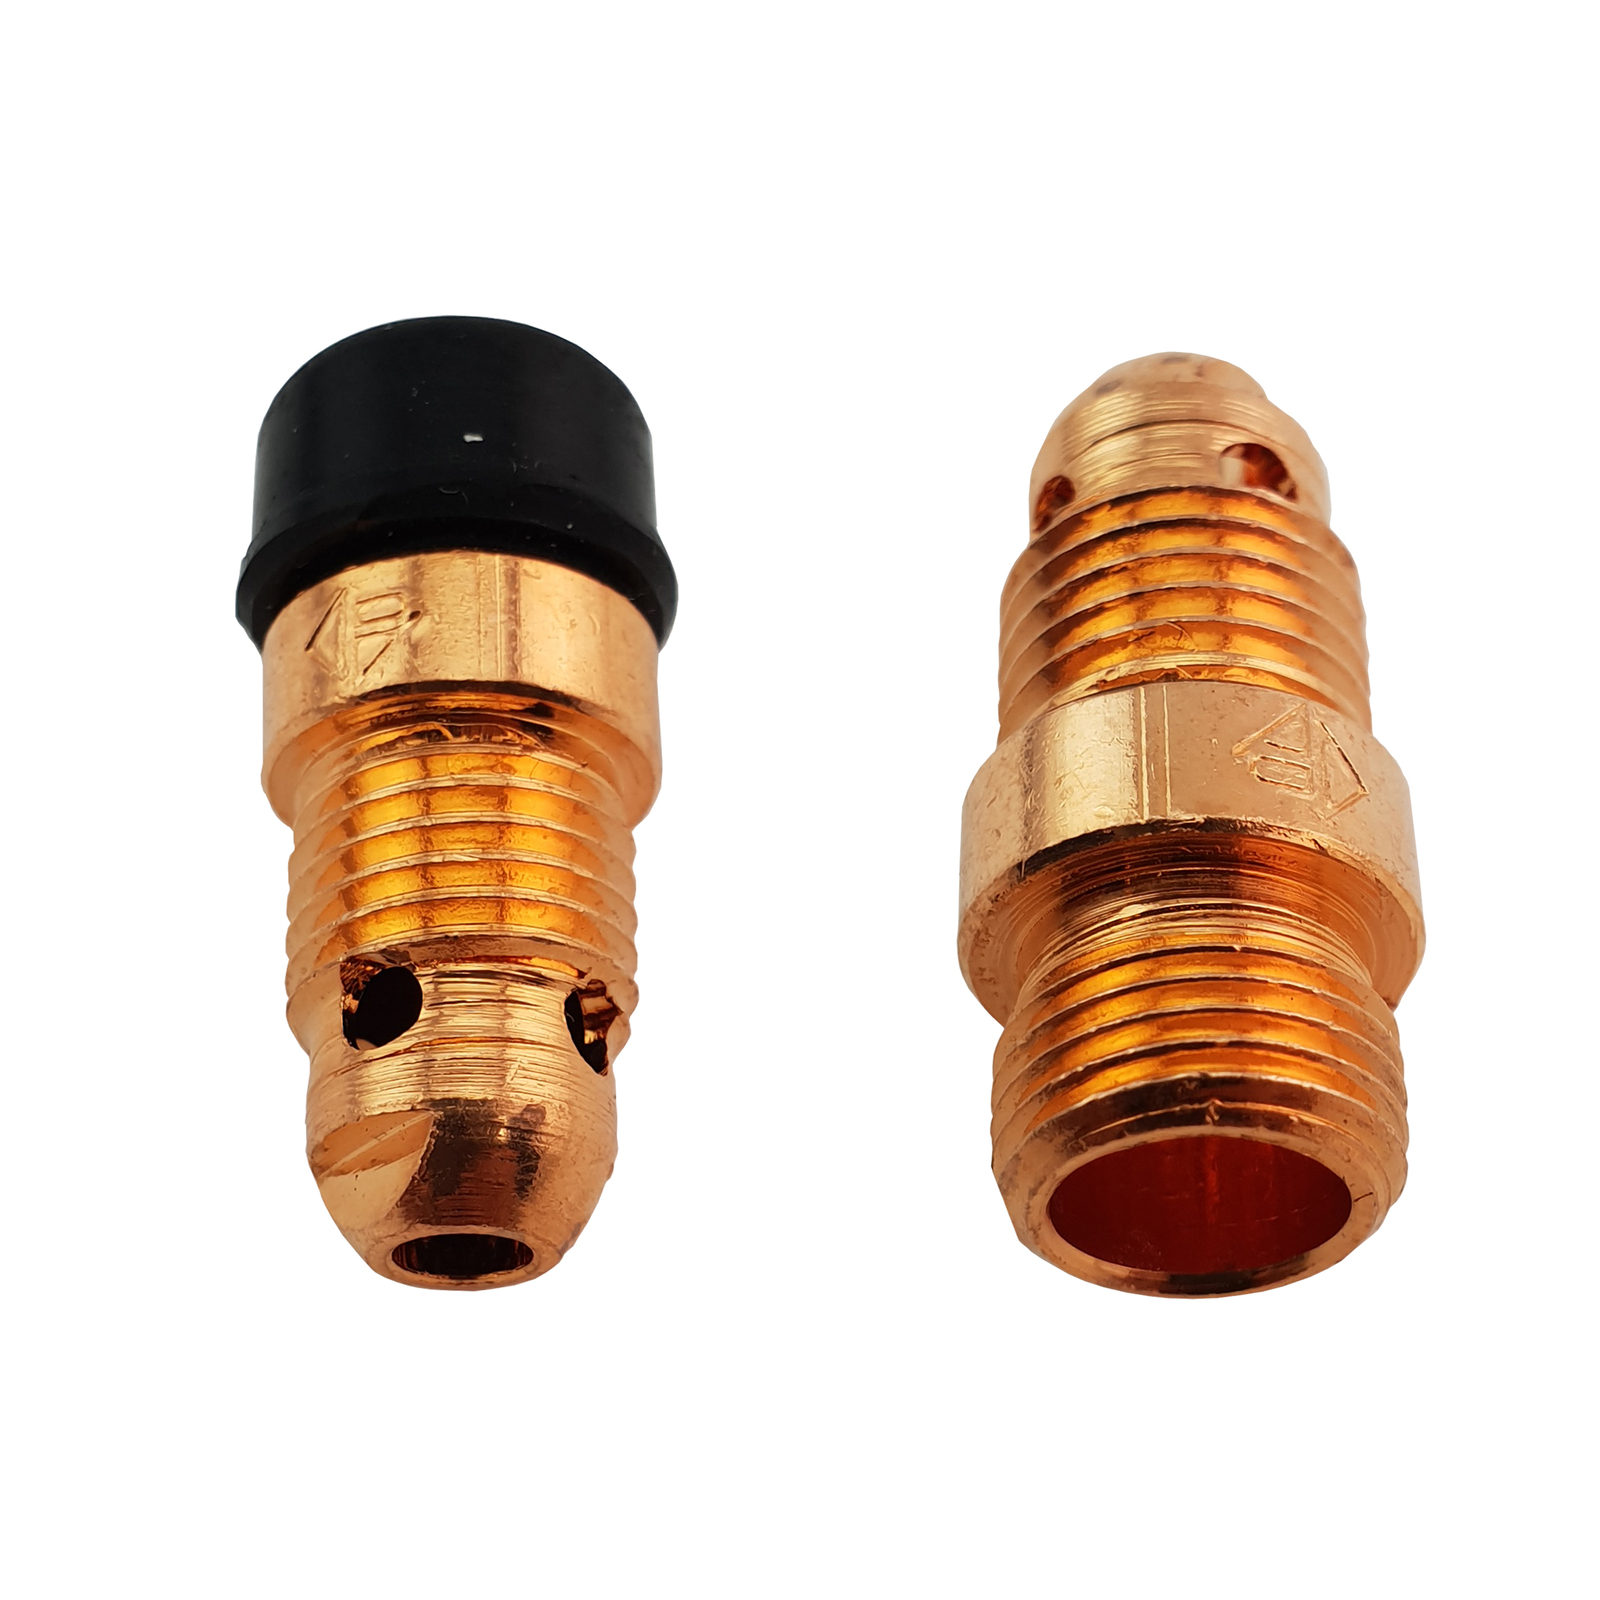 Stubby Collet Body for TIG Welding Torches 17/18/26 10 PACK Model: 17CB20 - All Sizes 